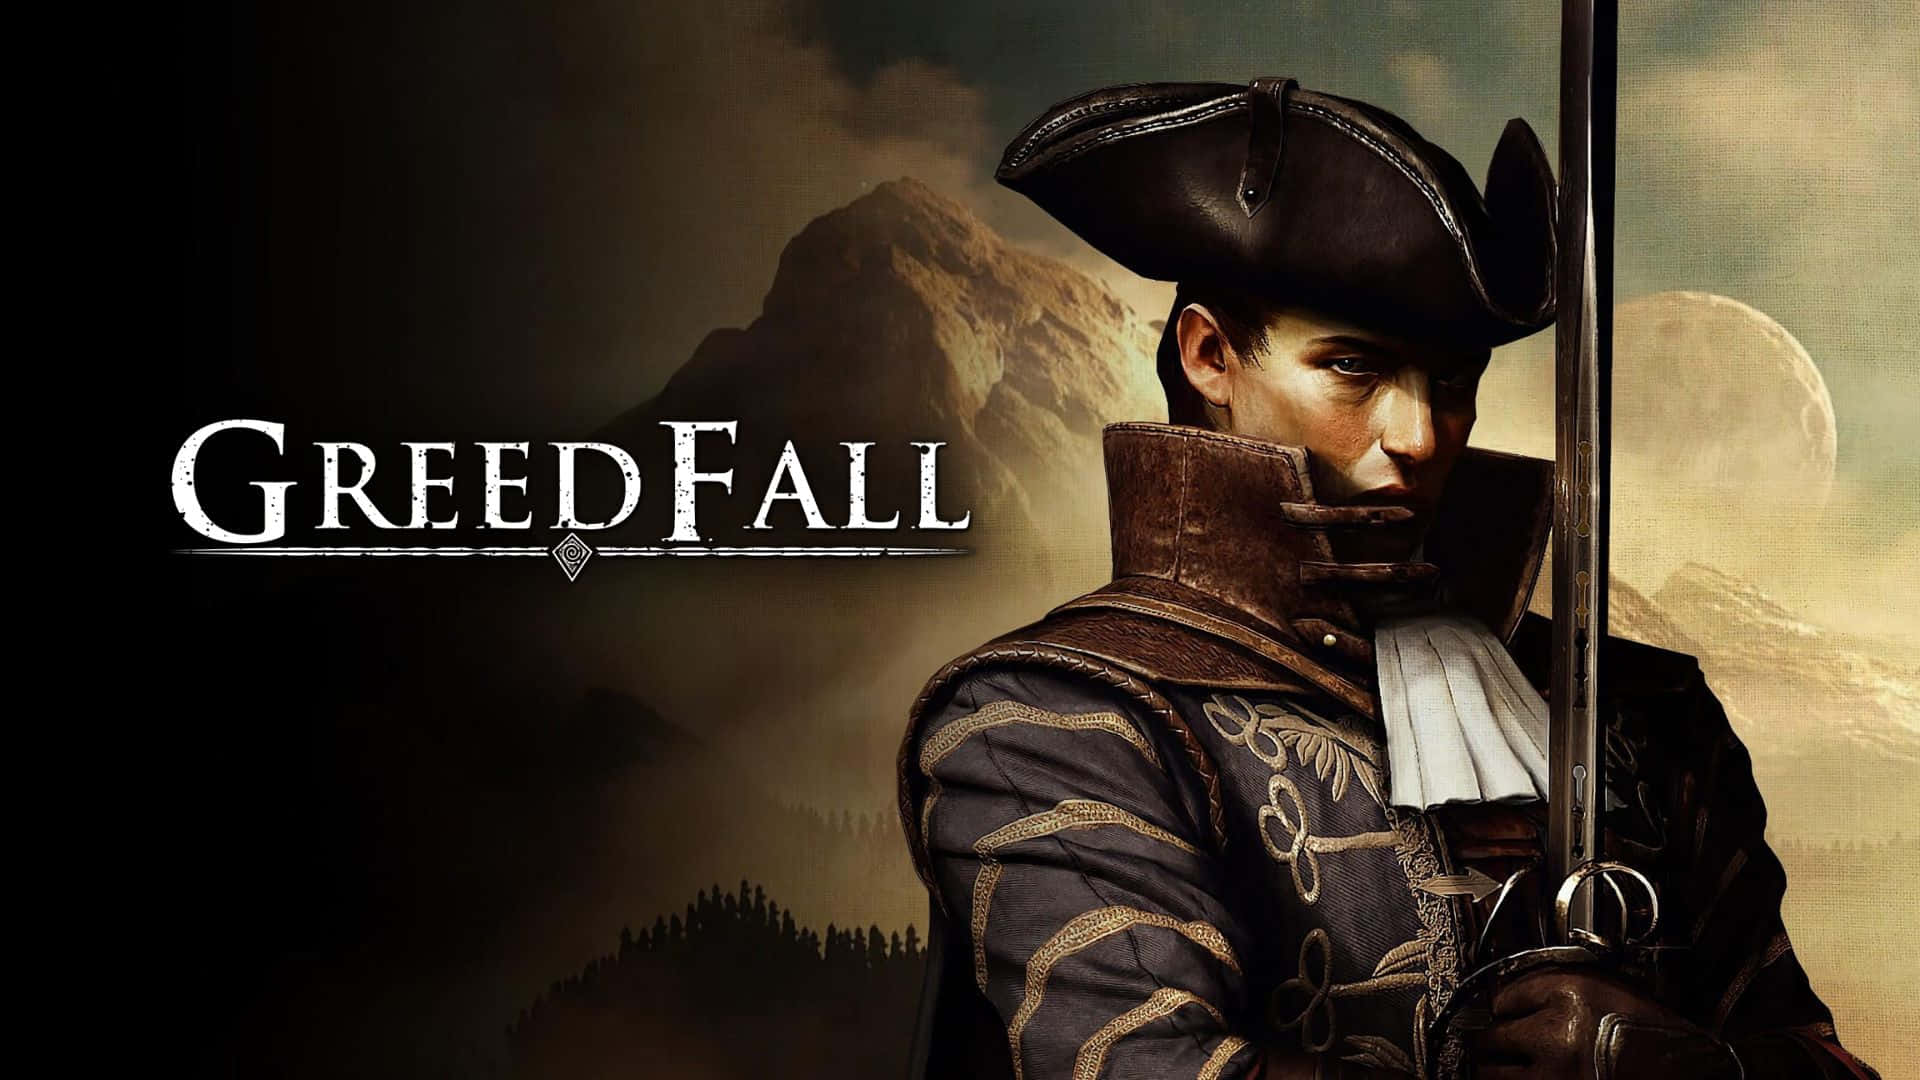 The Cover Of The Game Greedfall